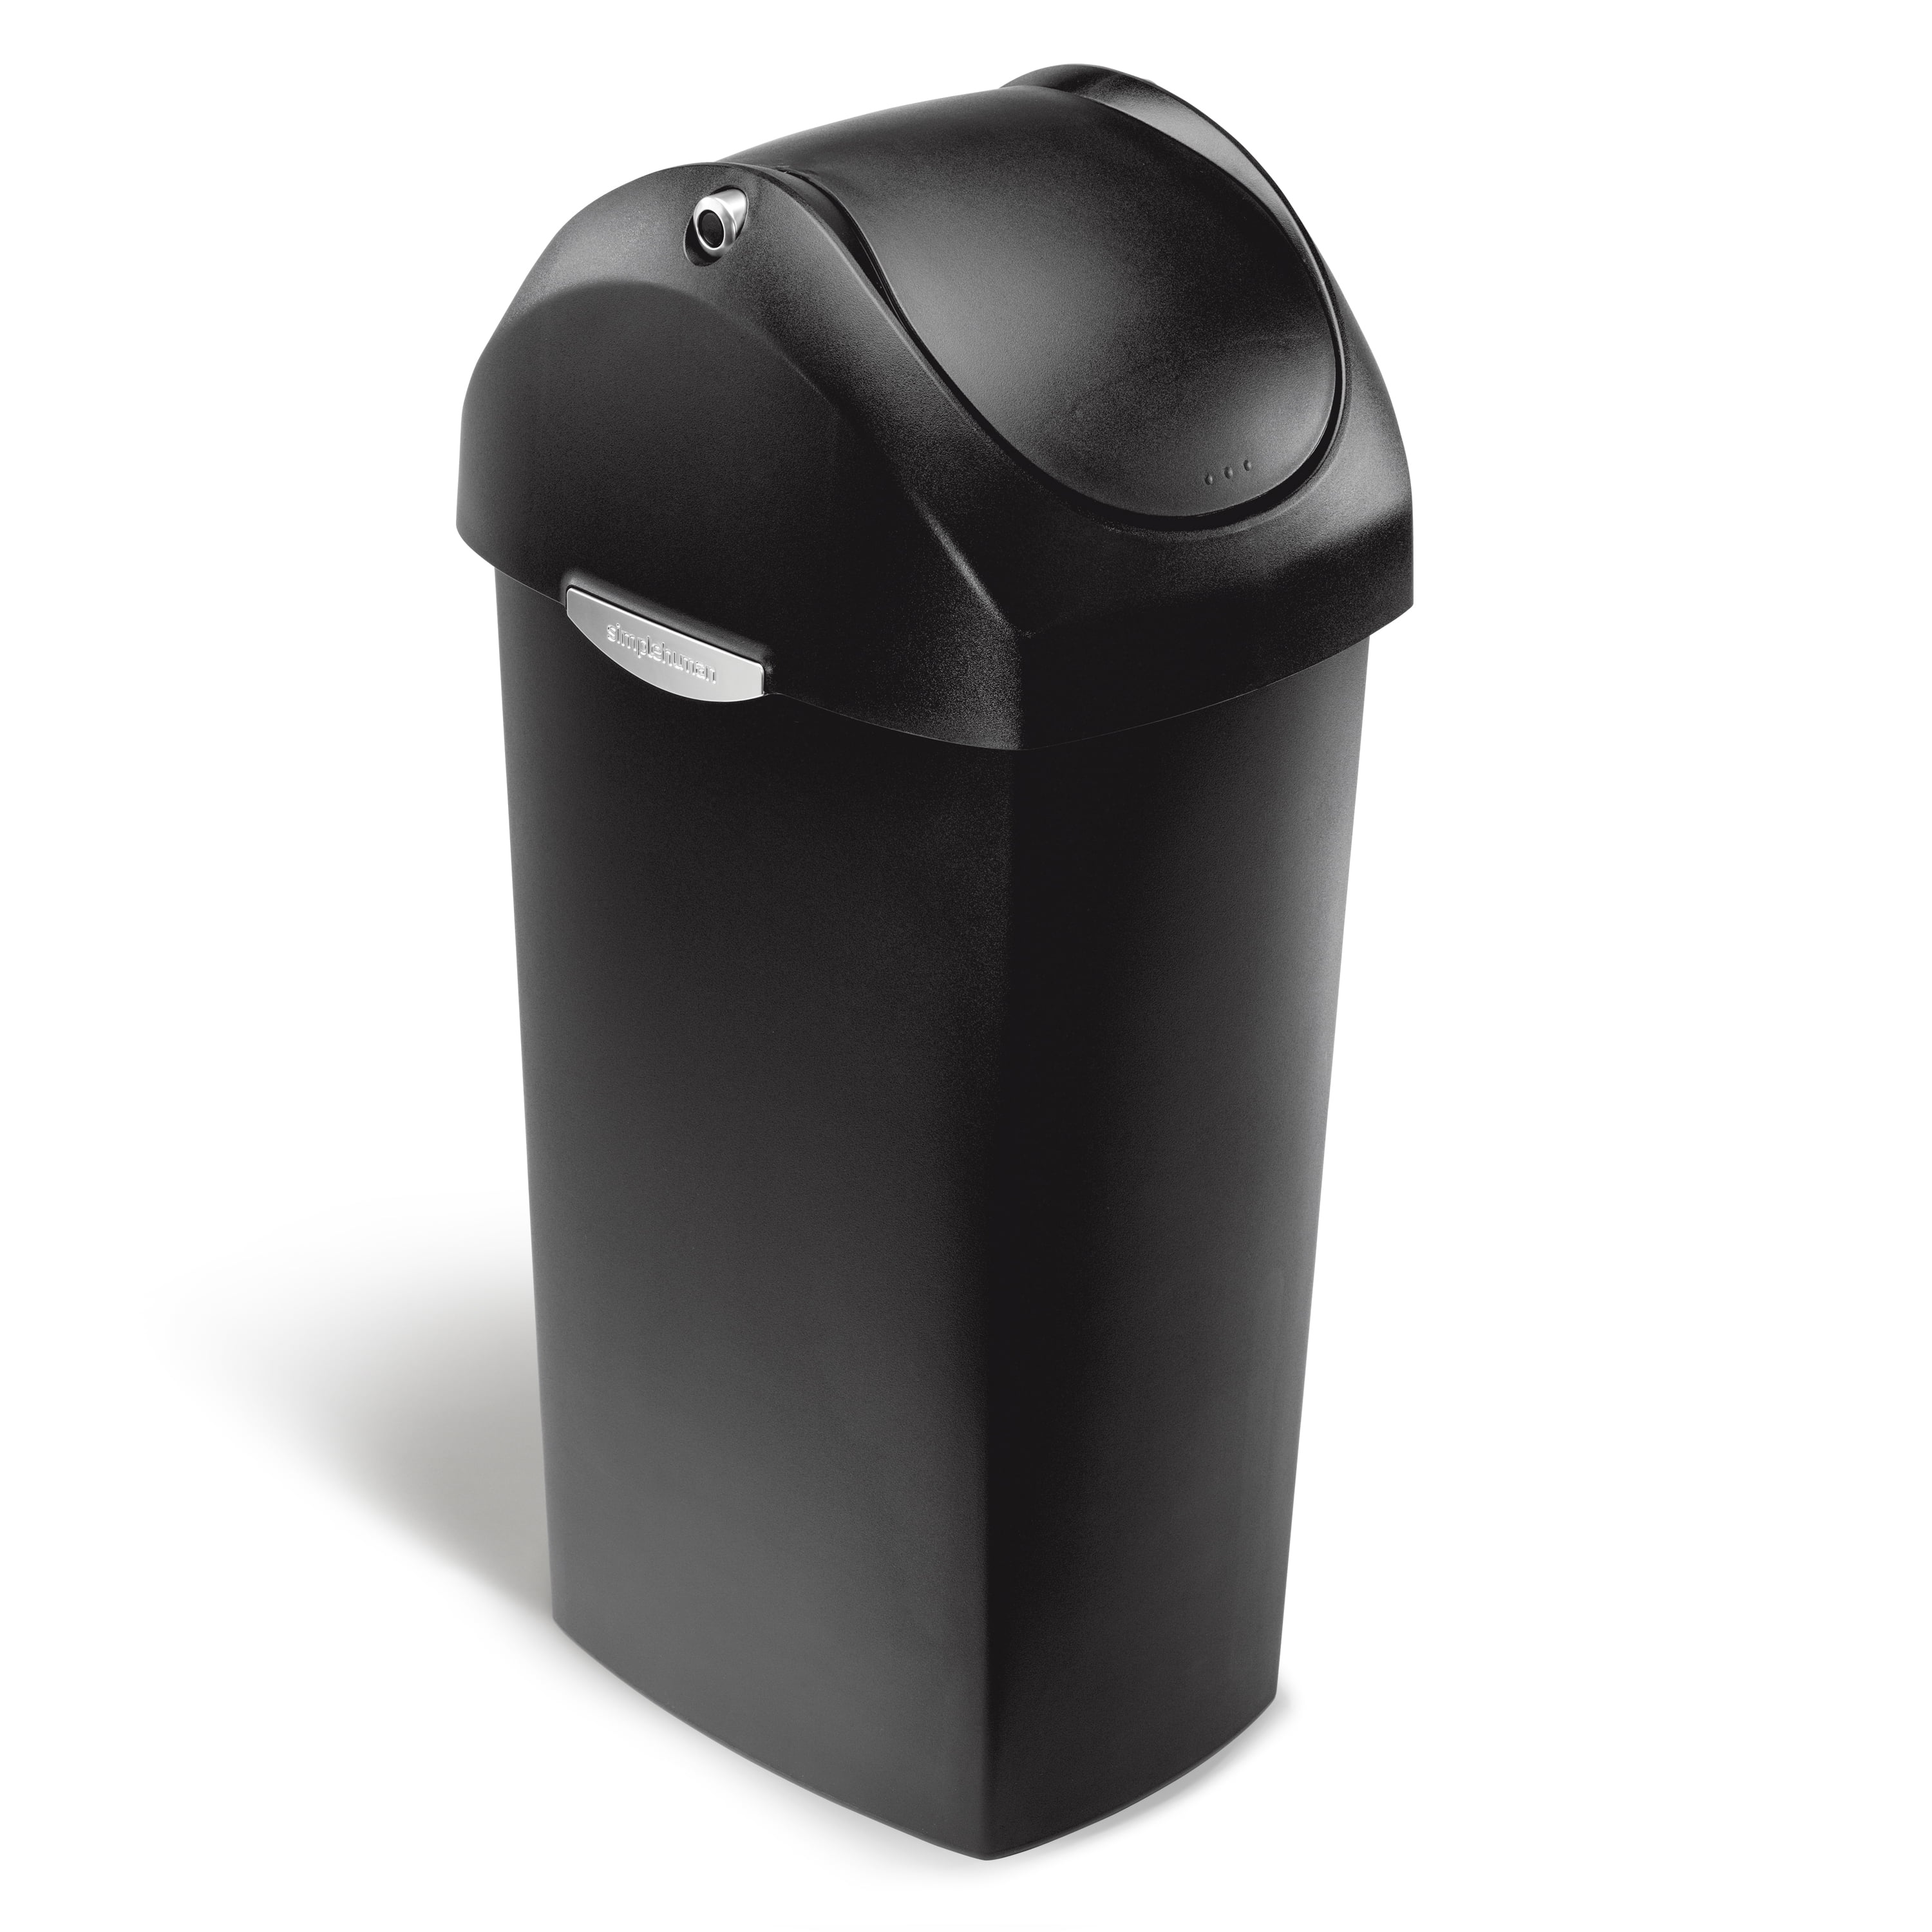 simplehuman® Open Top Stainless Steel Trash Can - 16 Gallon, Brush